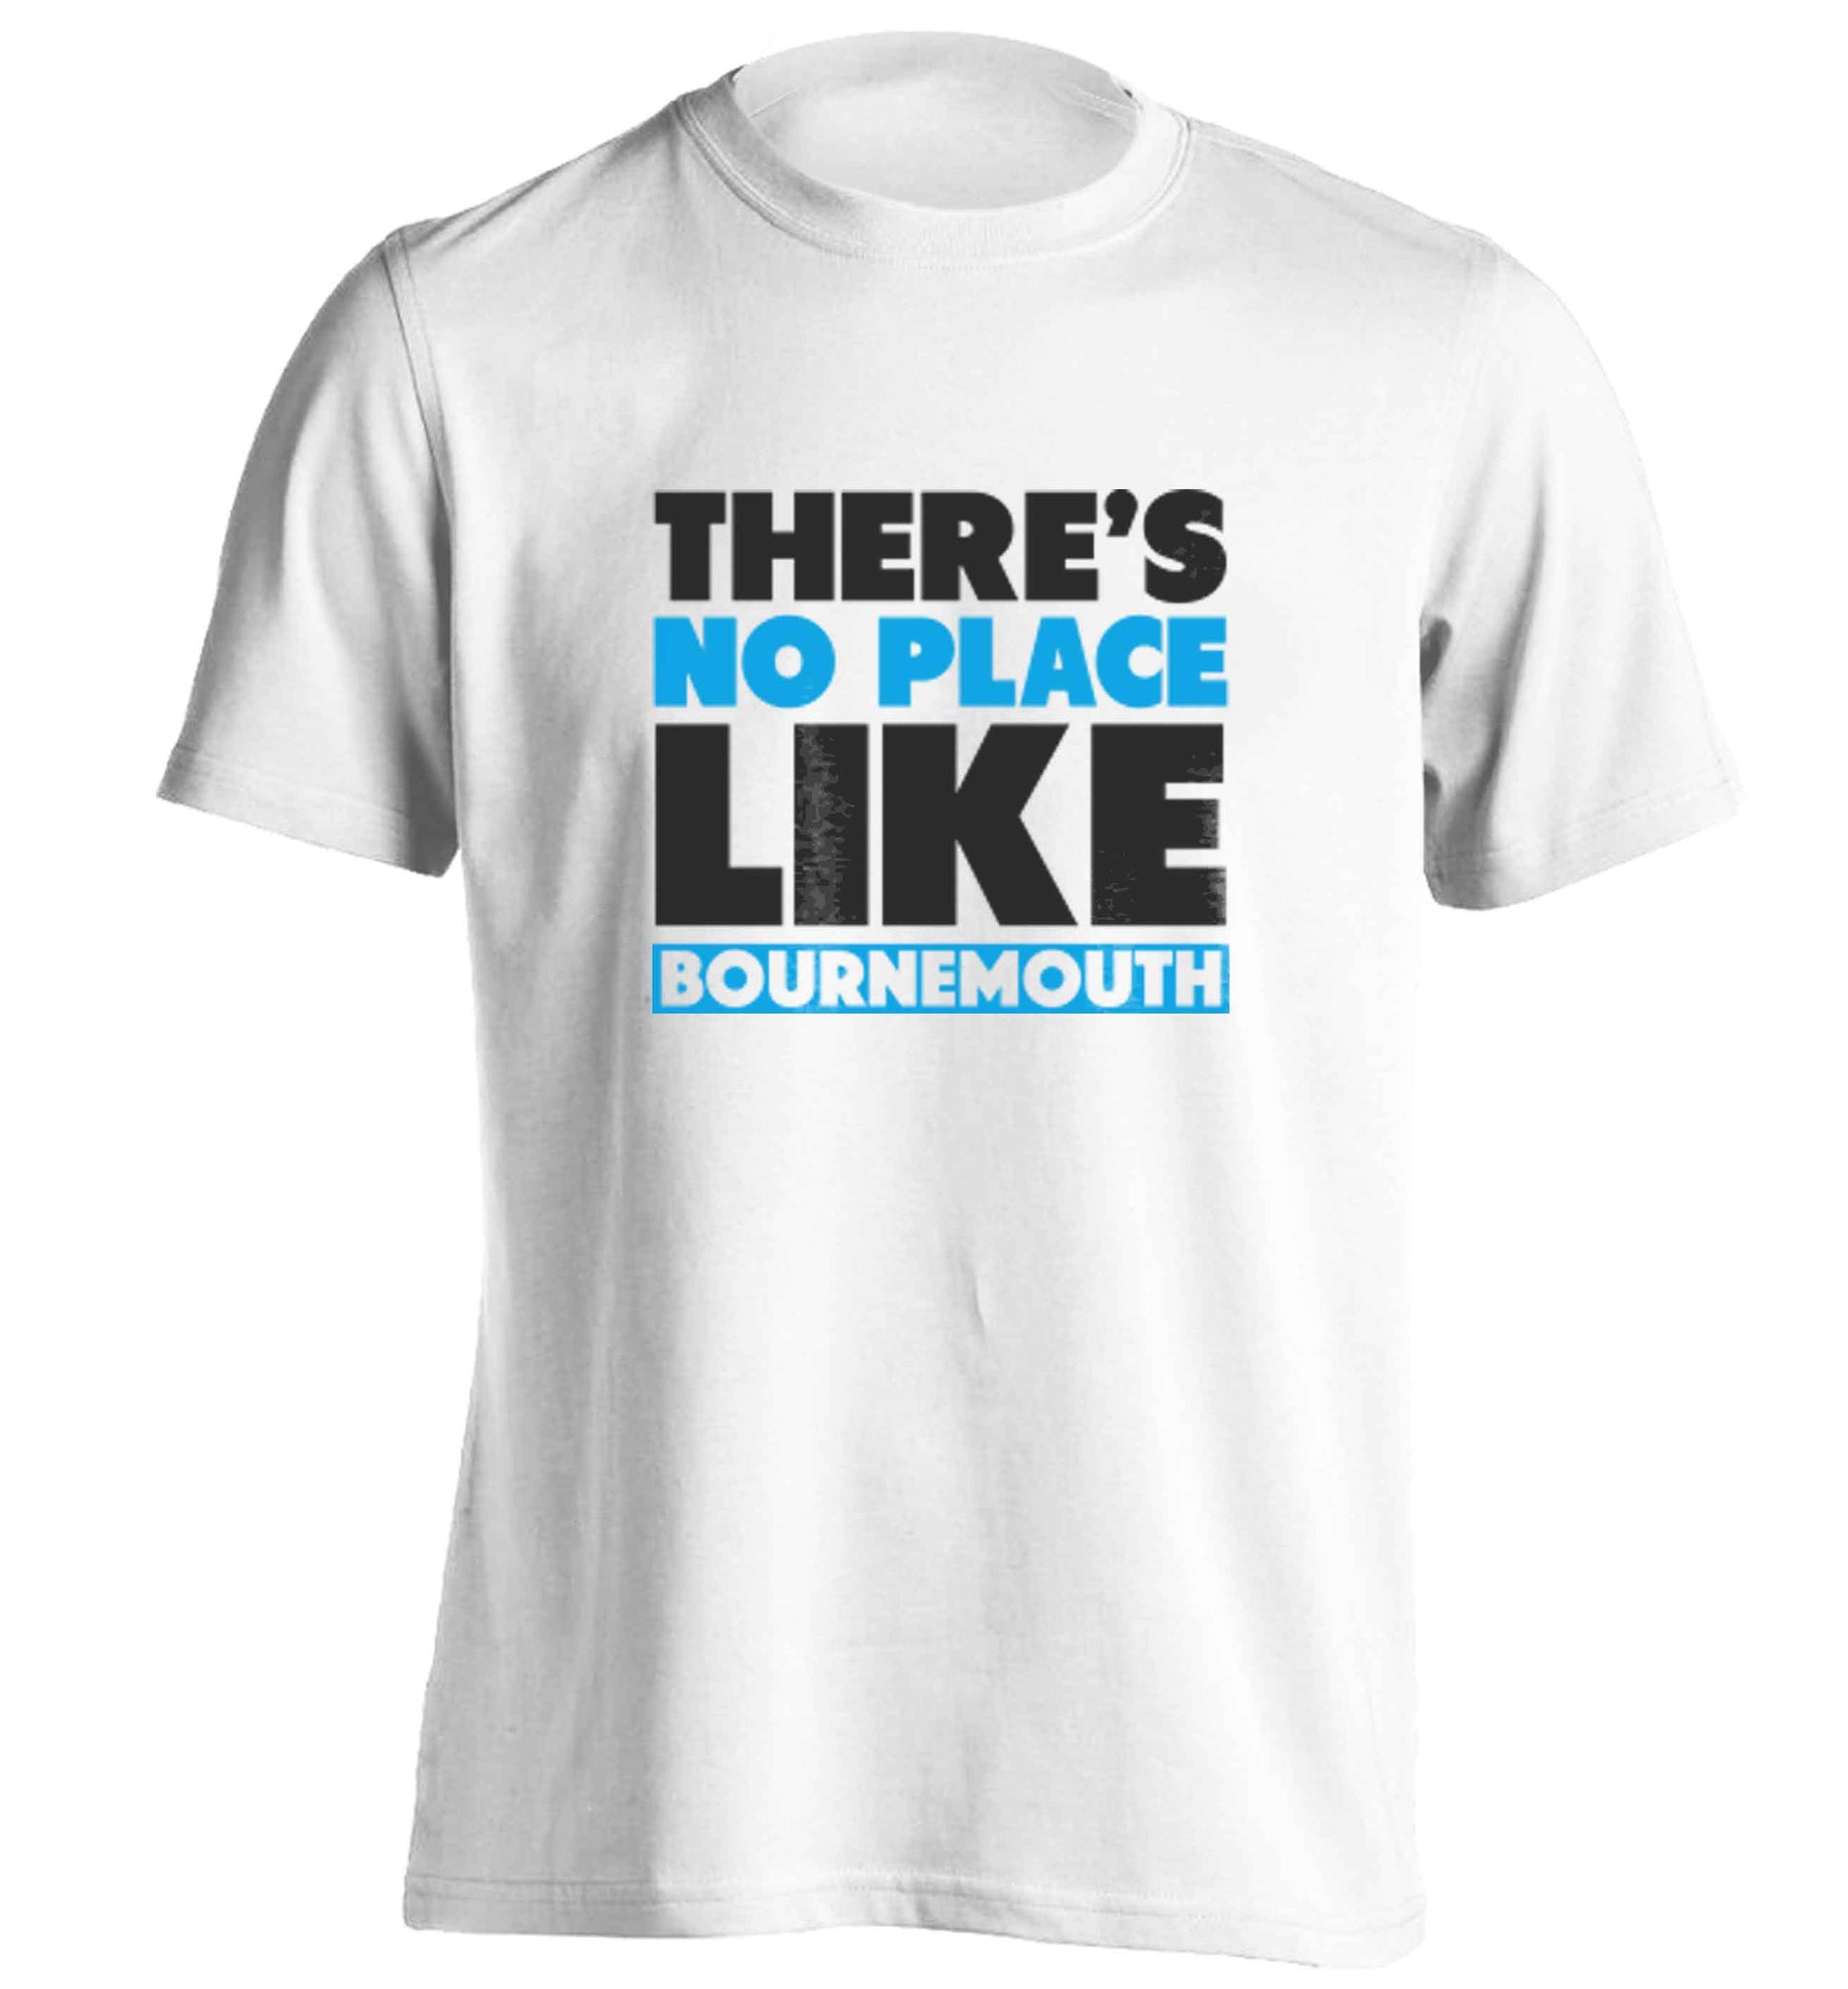 There's no place like Bournemouth adults unisex white Tshirt 2XL